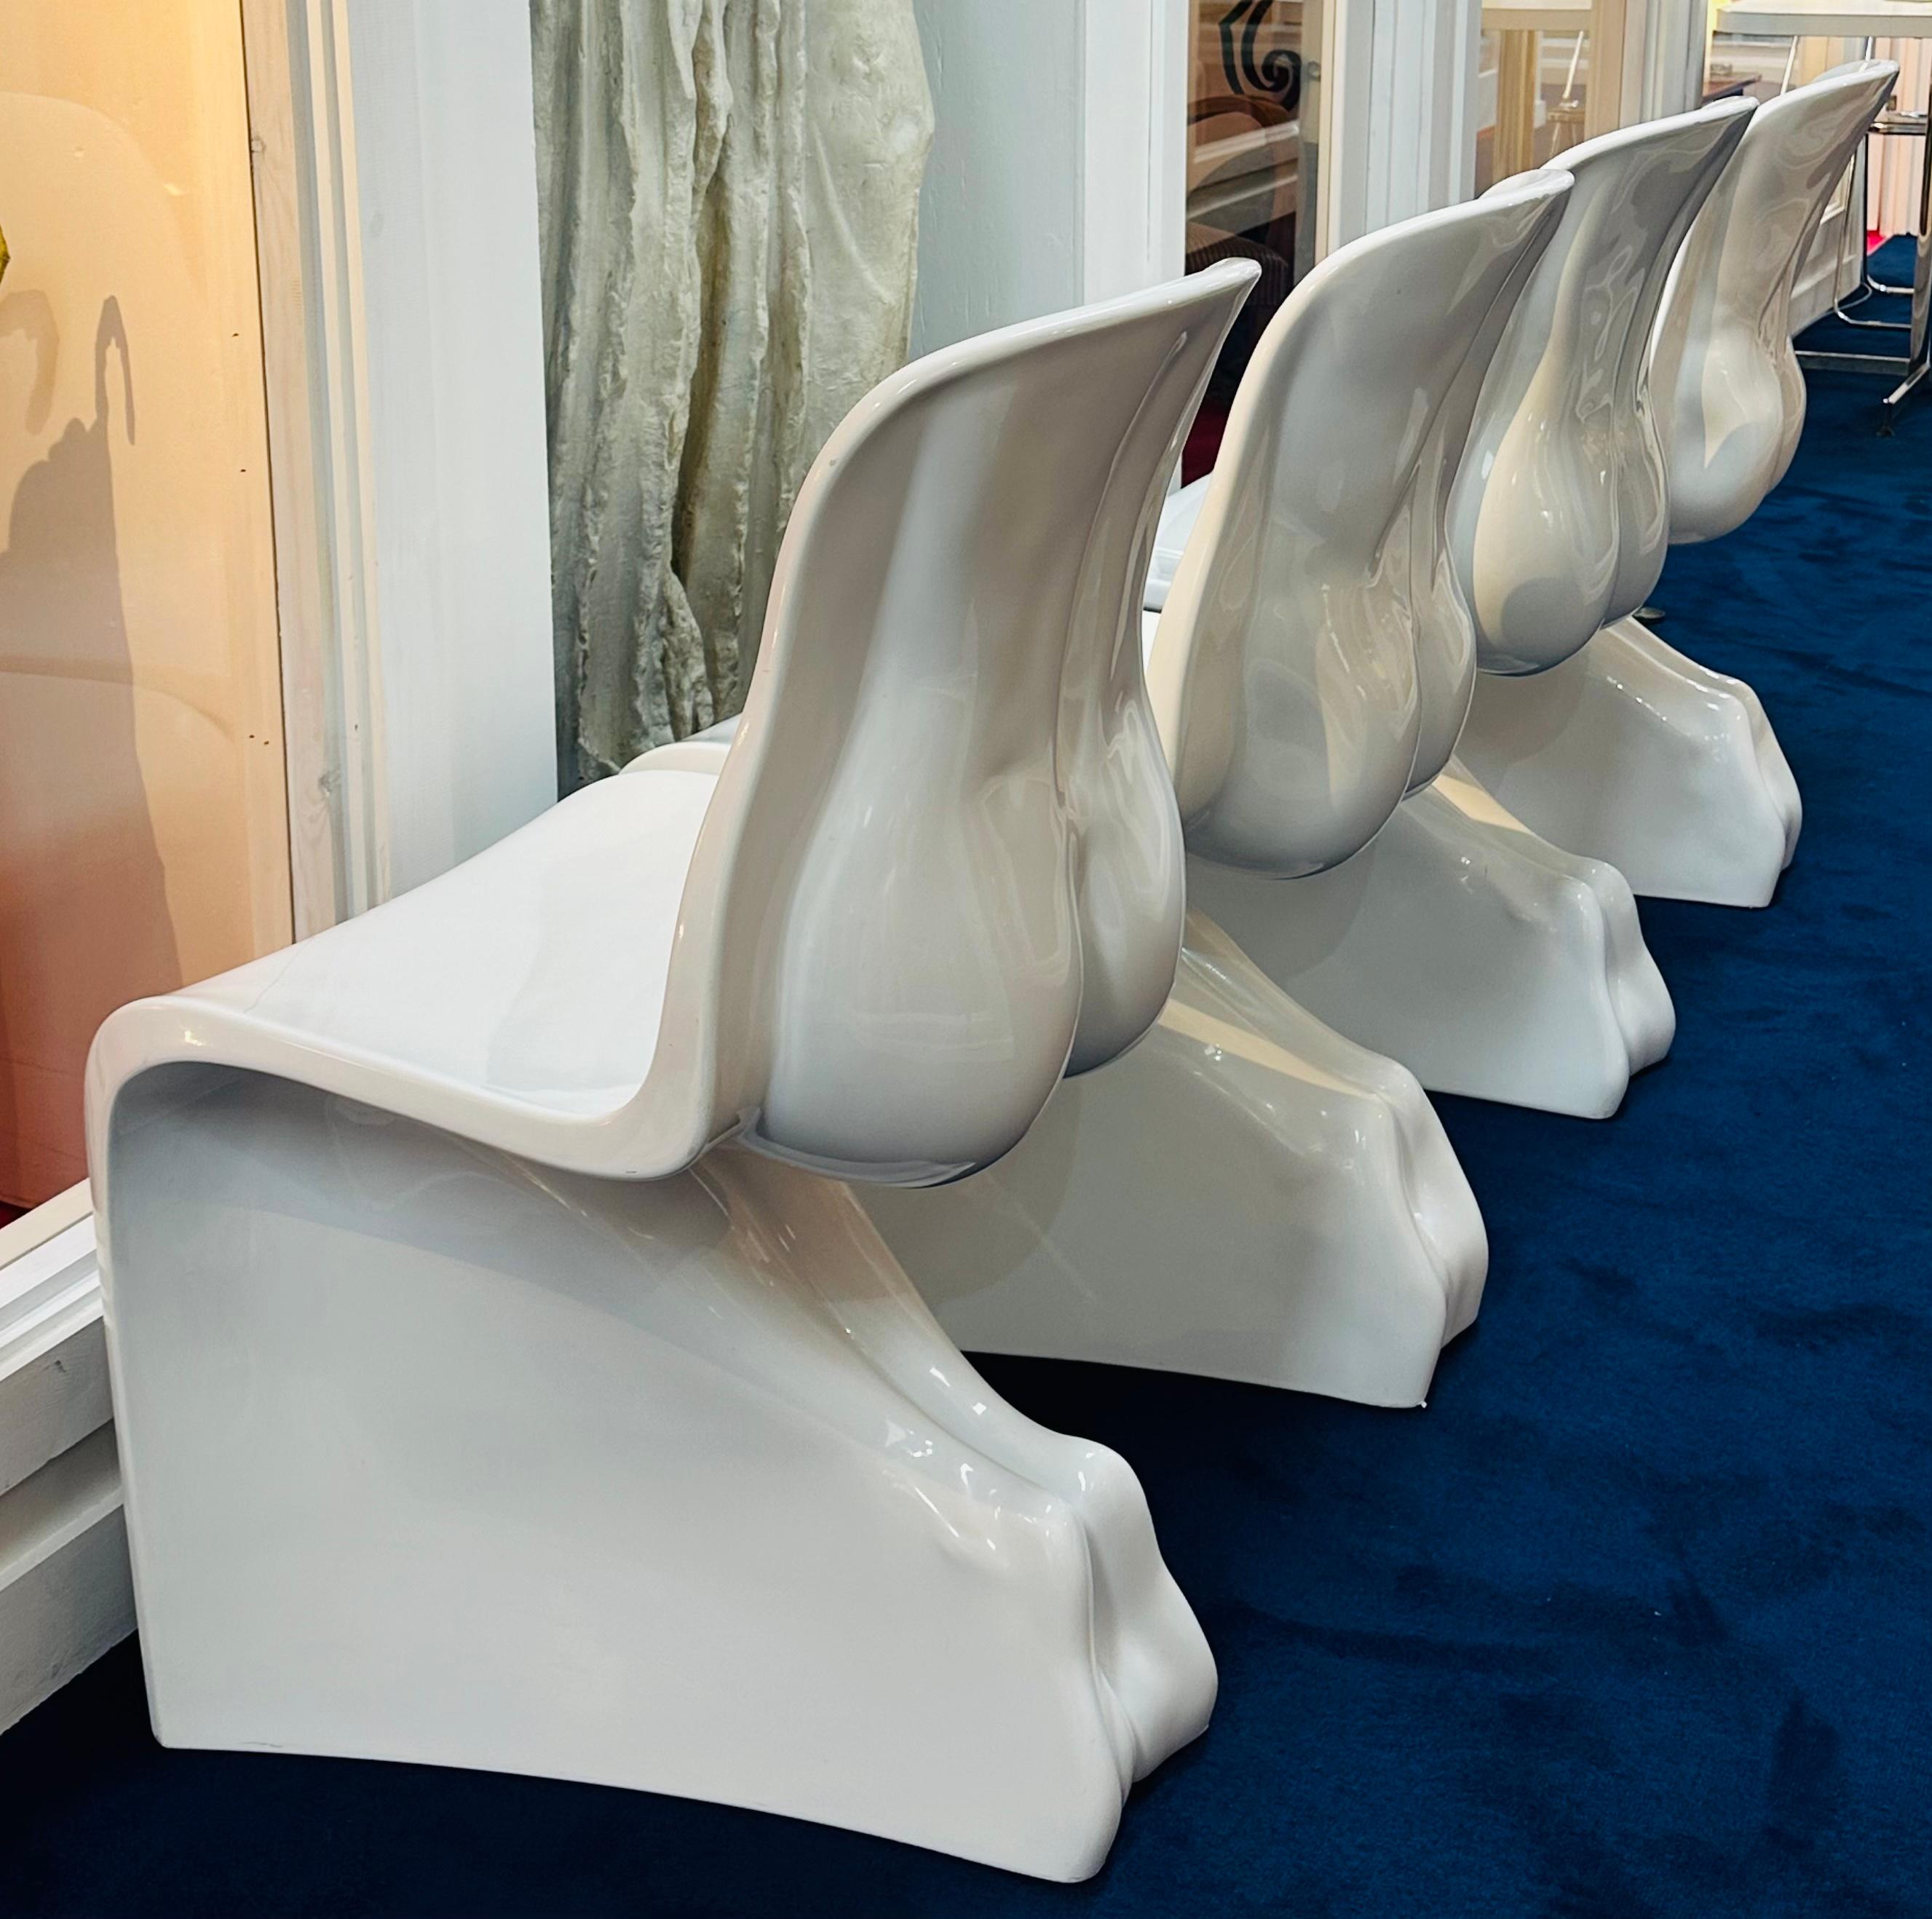 Space Age Set of 4 2008 Him & Her Glossy White Glossy Chair - Fabio Novembre for Casamania